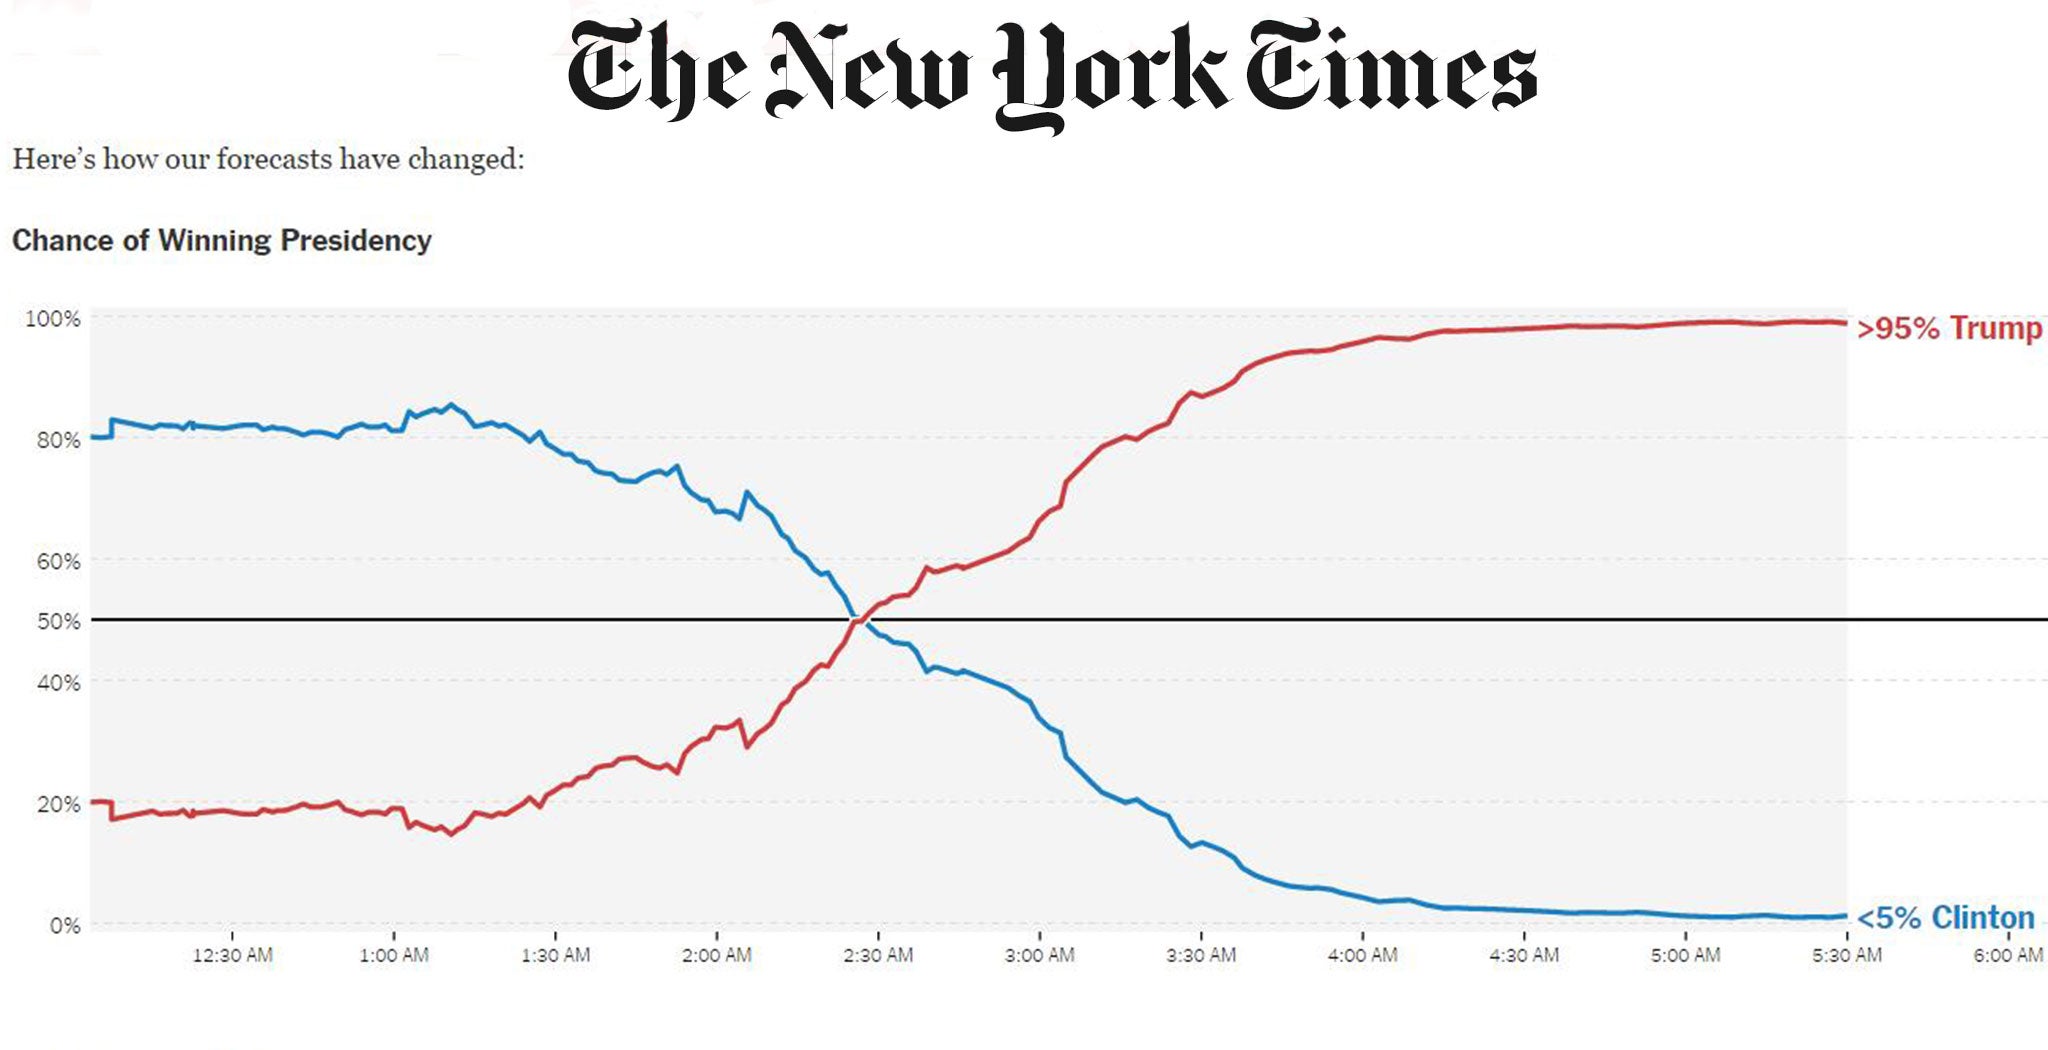 The New York Times' Presidential forecast showed the dramatically changing chances of Donald Trump becoming President